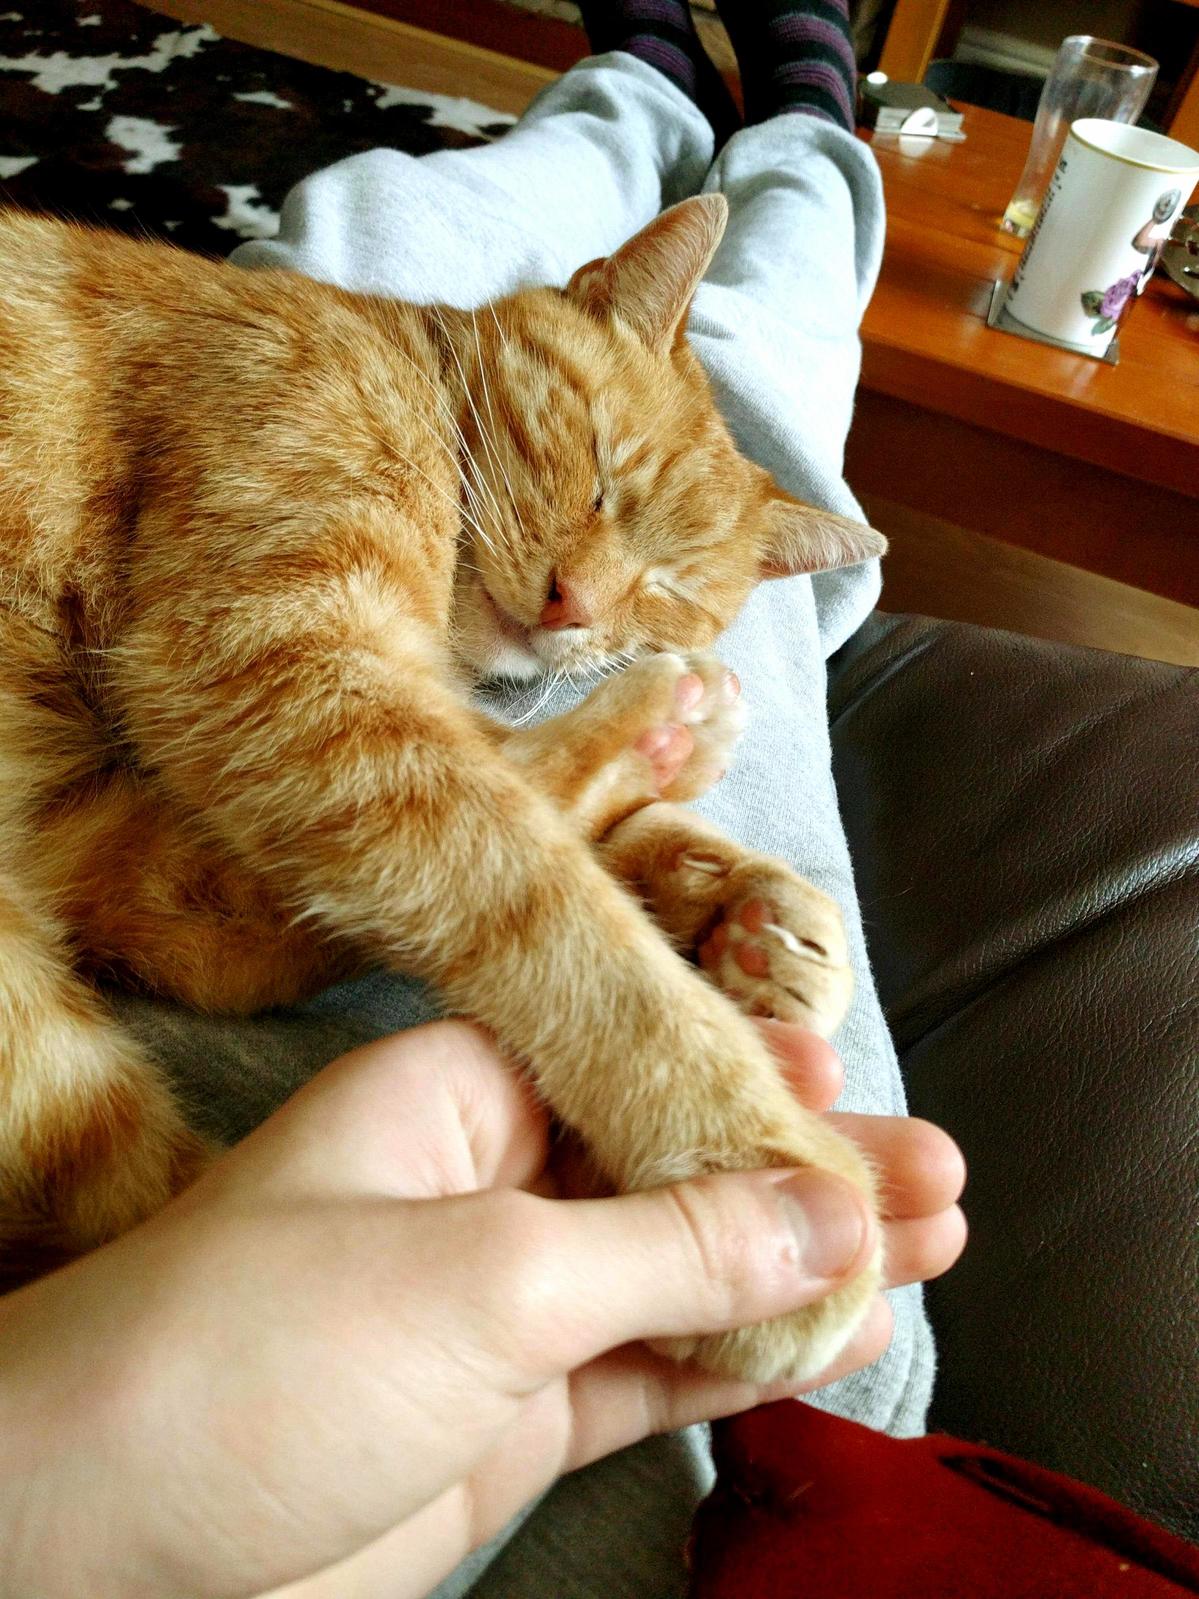 He loves it when i hold his paw as he sleeps